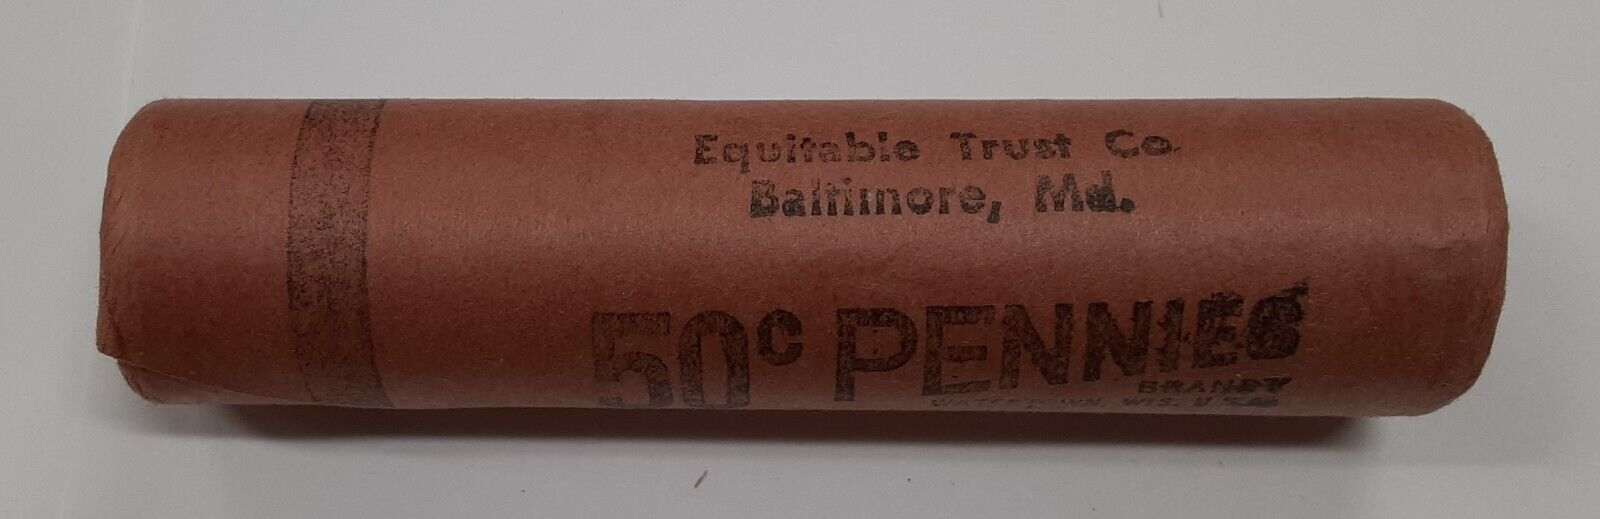 1958 Lincoln Cent Roll BU 50 Coins in OBW From Equitable Trust Co in Baltimore